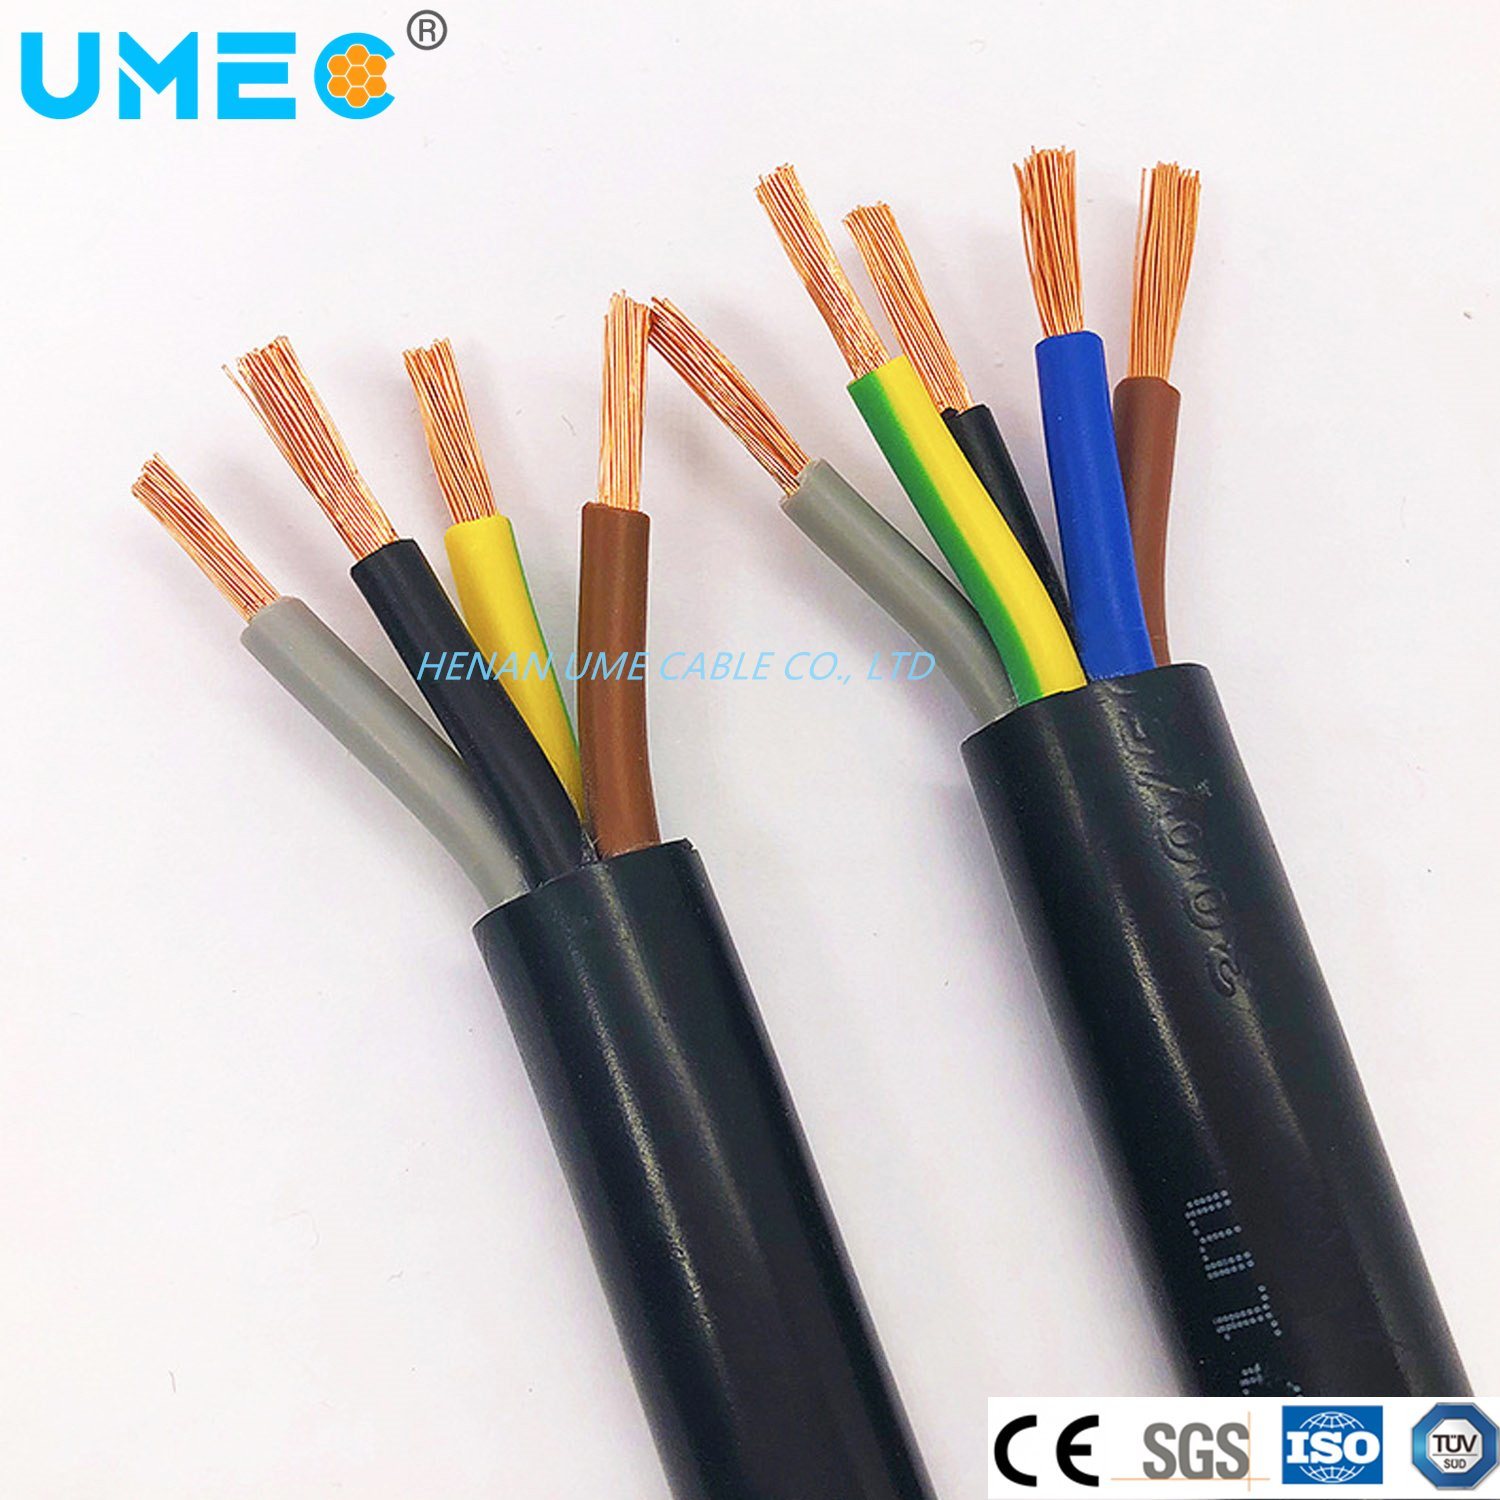 Flame Retardant Rvv H05VV-F Myym Cable PVC Insualted Power Cable 3X1.5mm2 4X2.5mm2